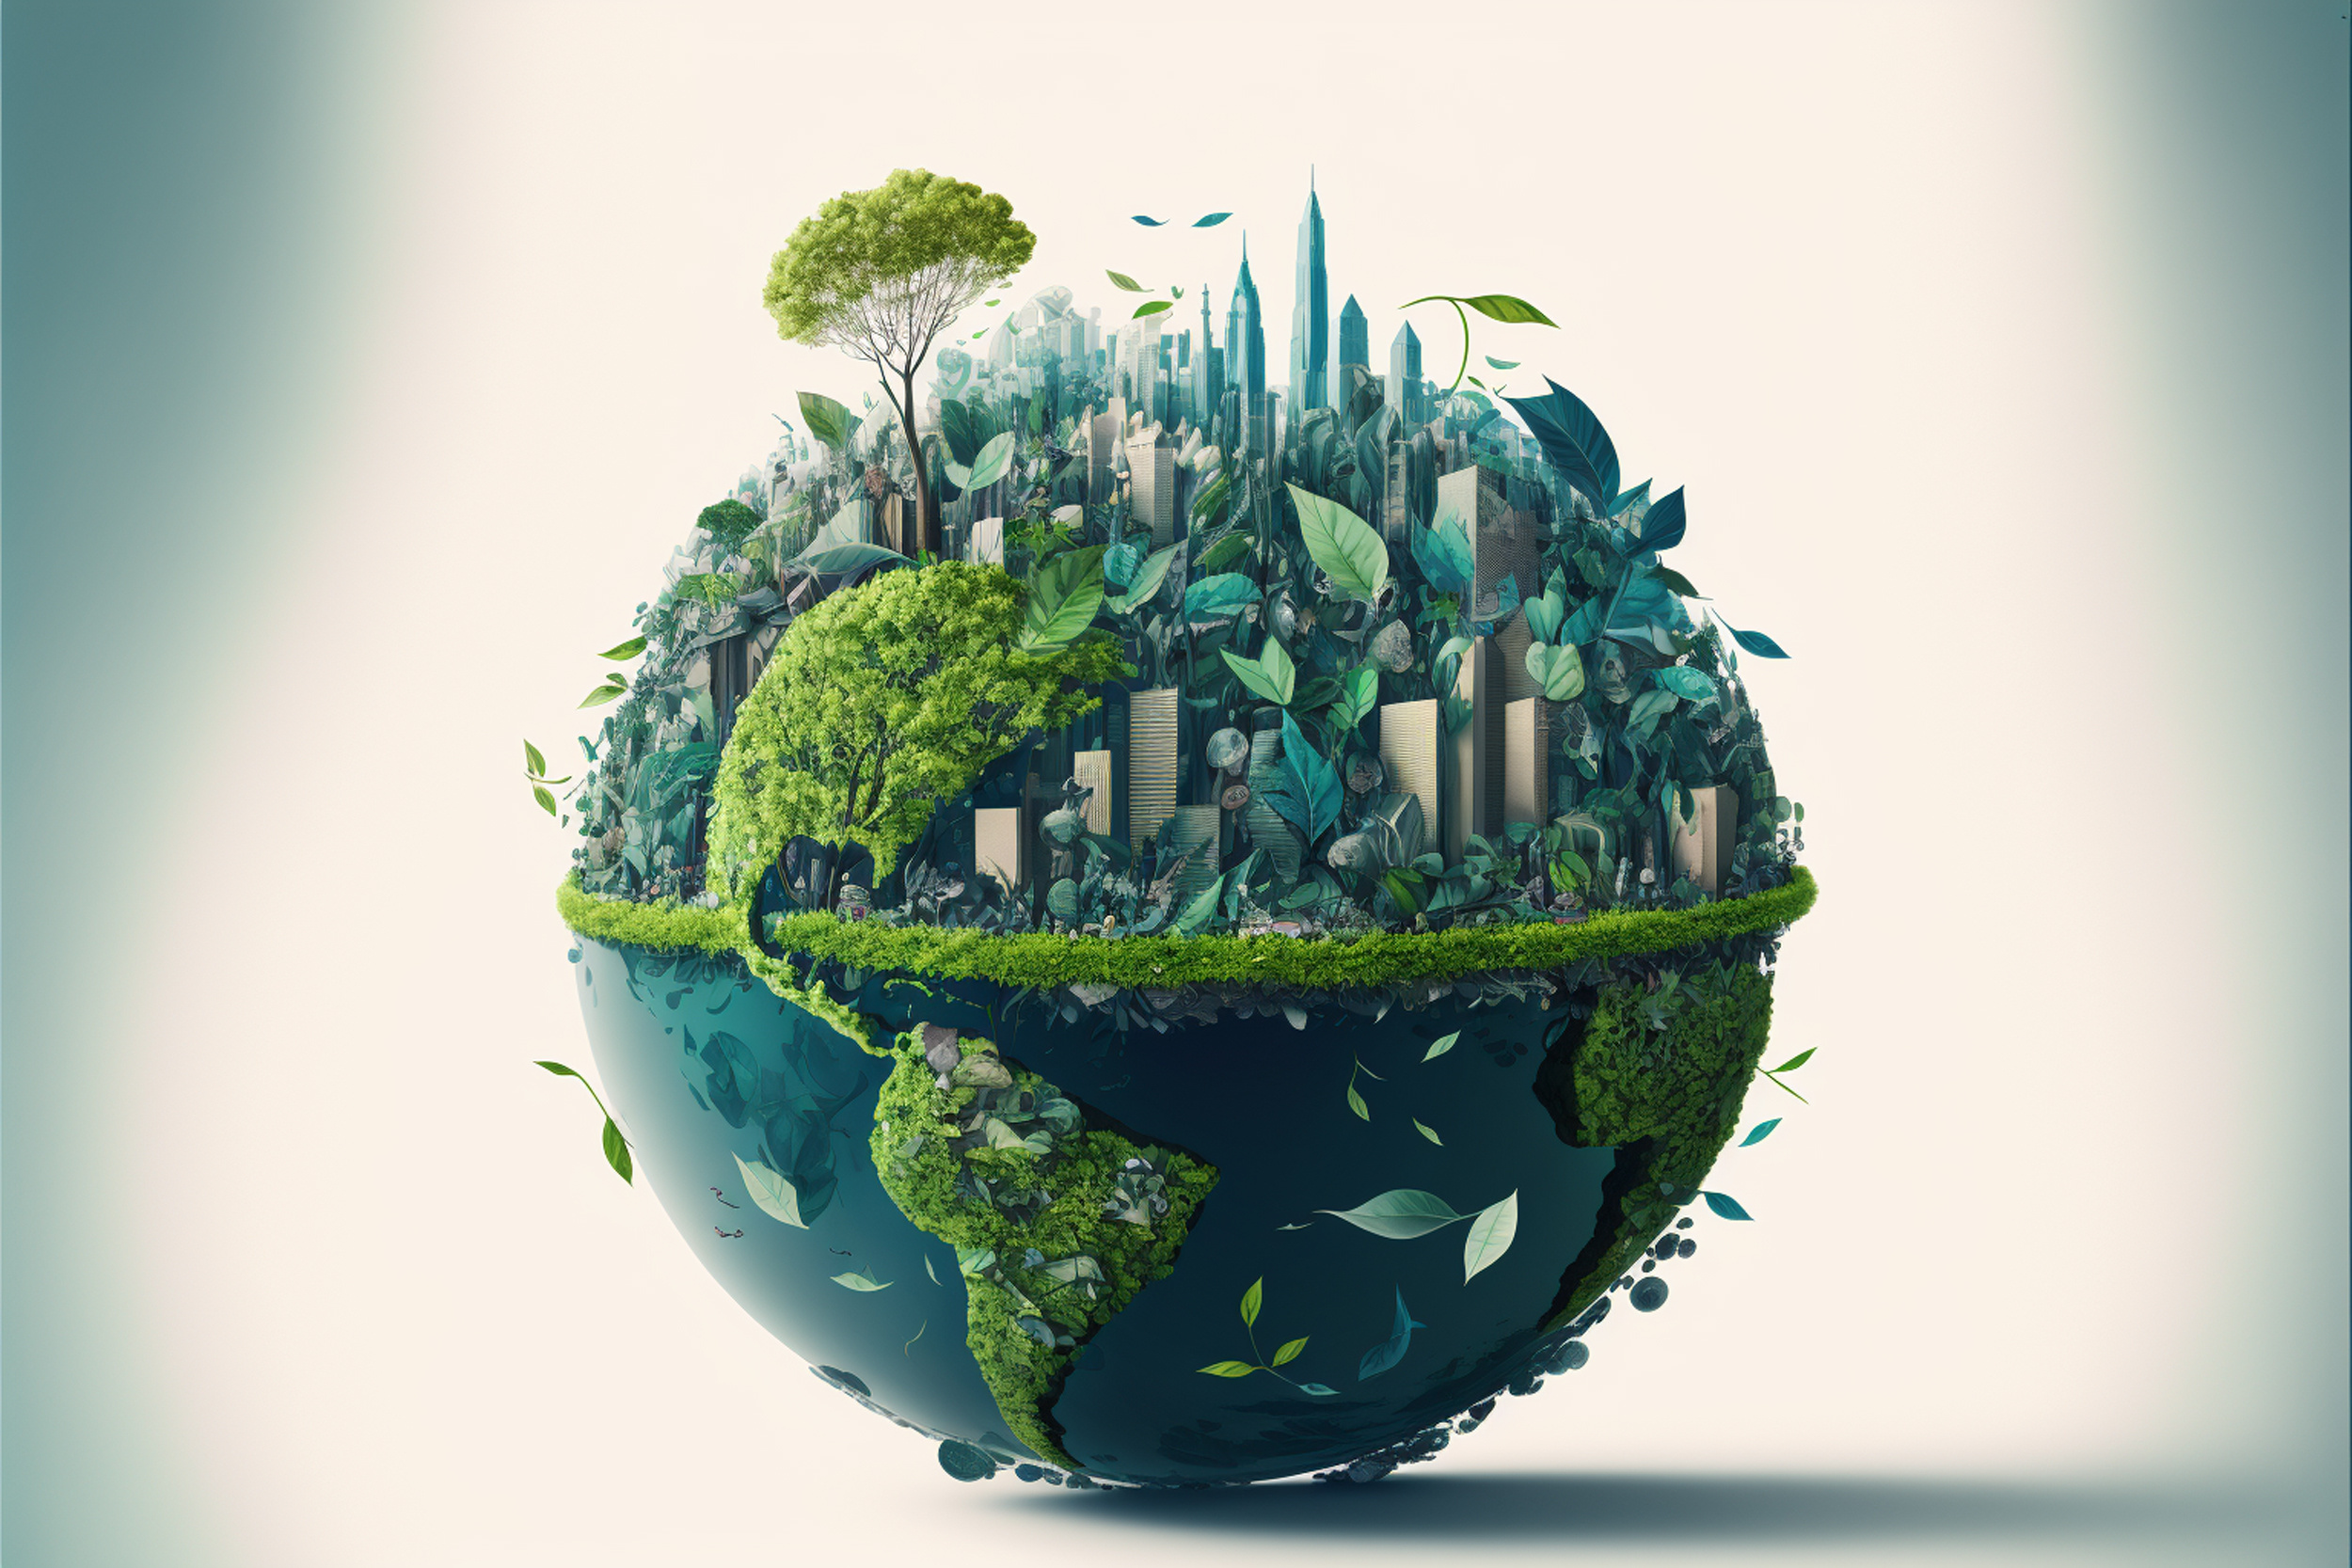 3-D model of globe with trees (concept of ecology)